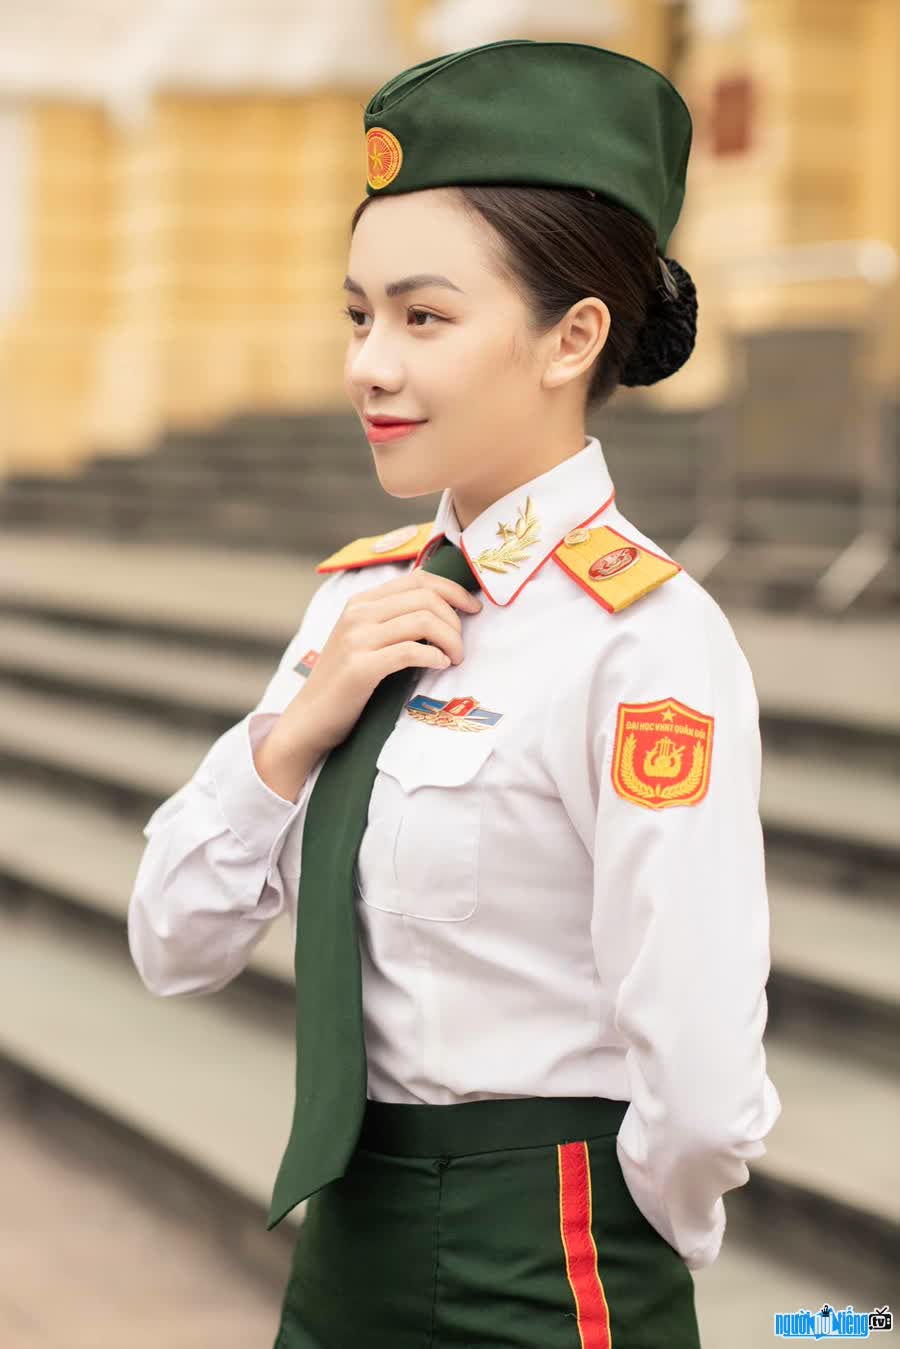 Singer Vu Thuy Linh studying at Military University of Culture and Arts